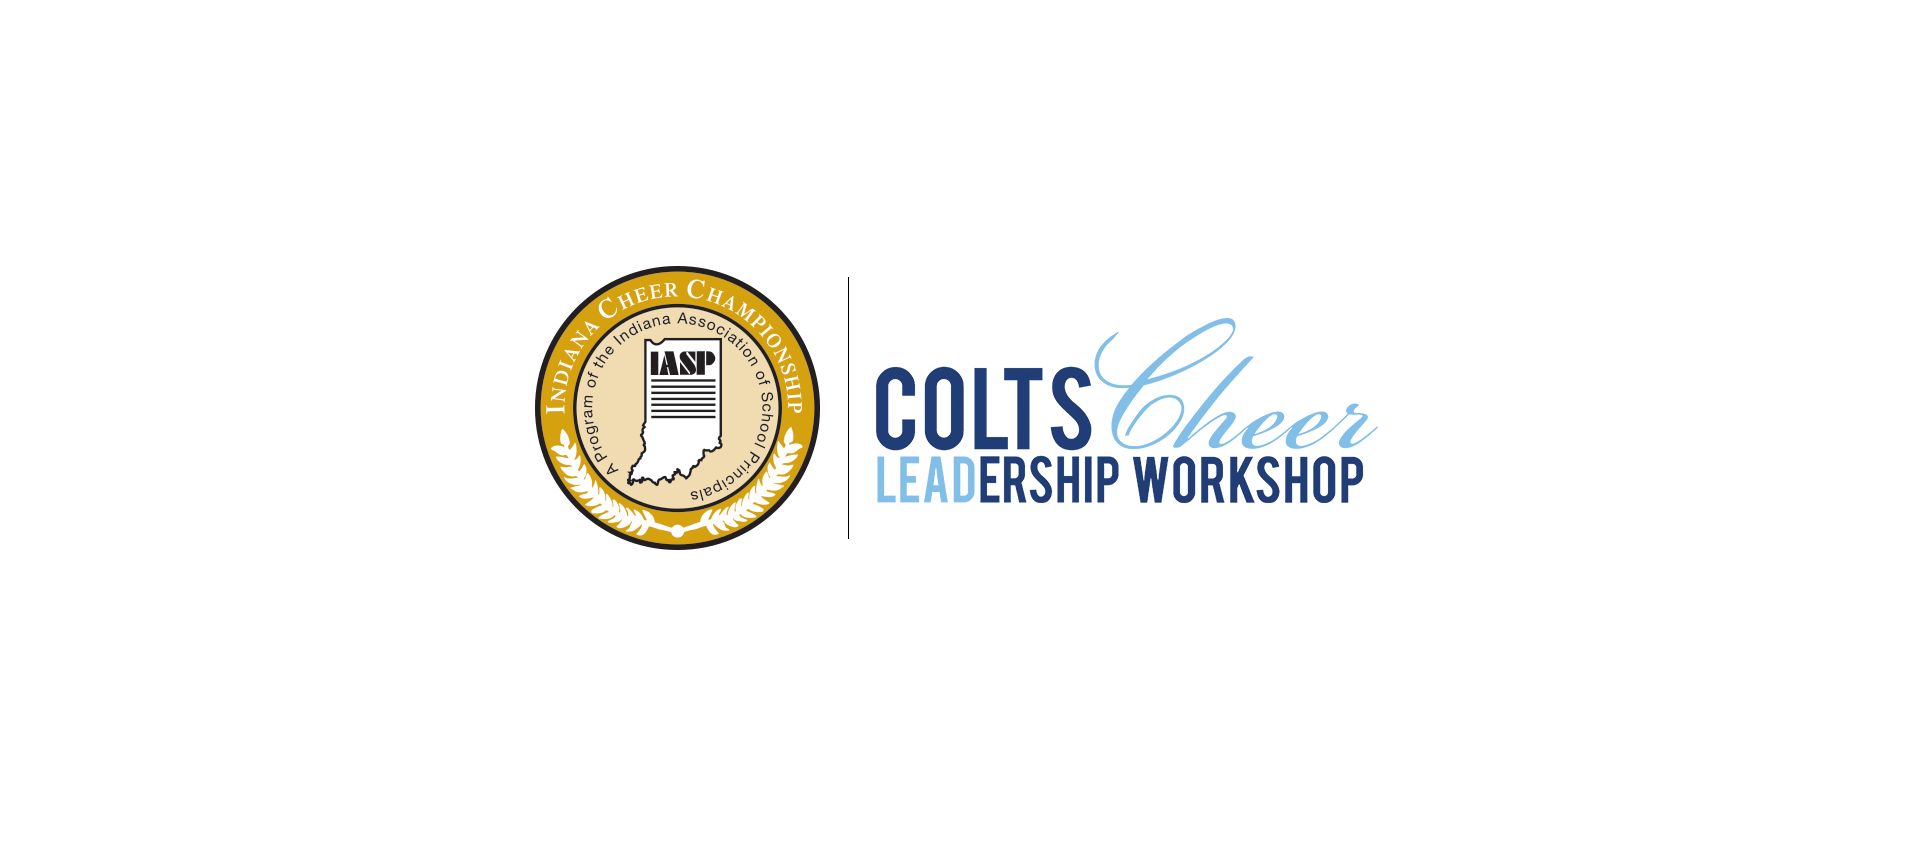 2019 Cheer Coach Conference & Student Leadership Workshop Date Announced – Indiana ...